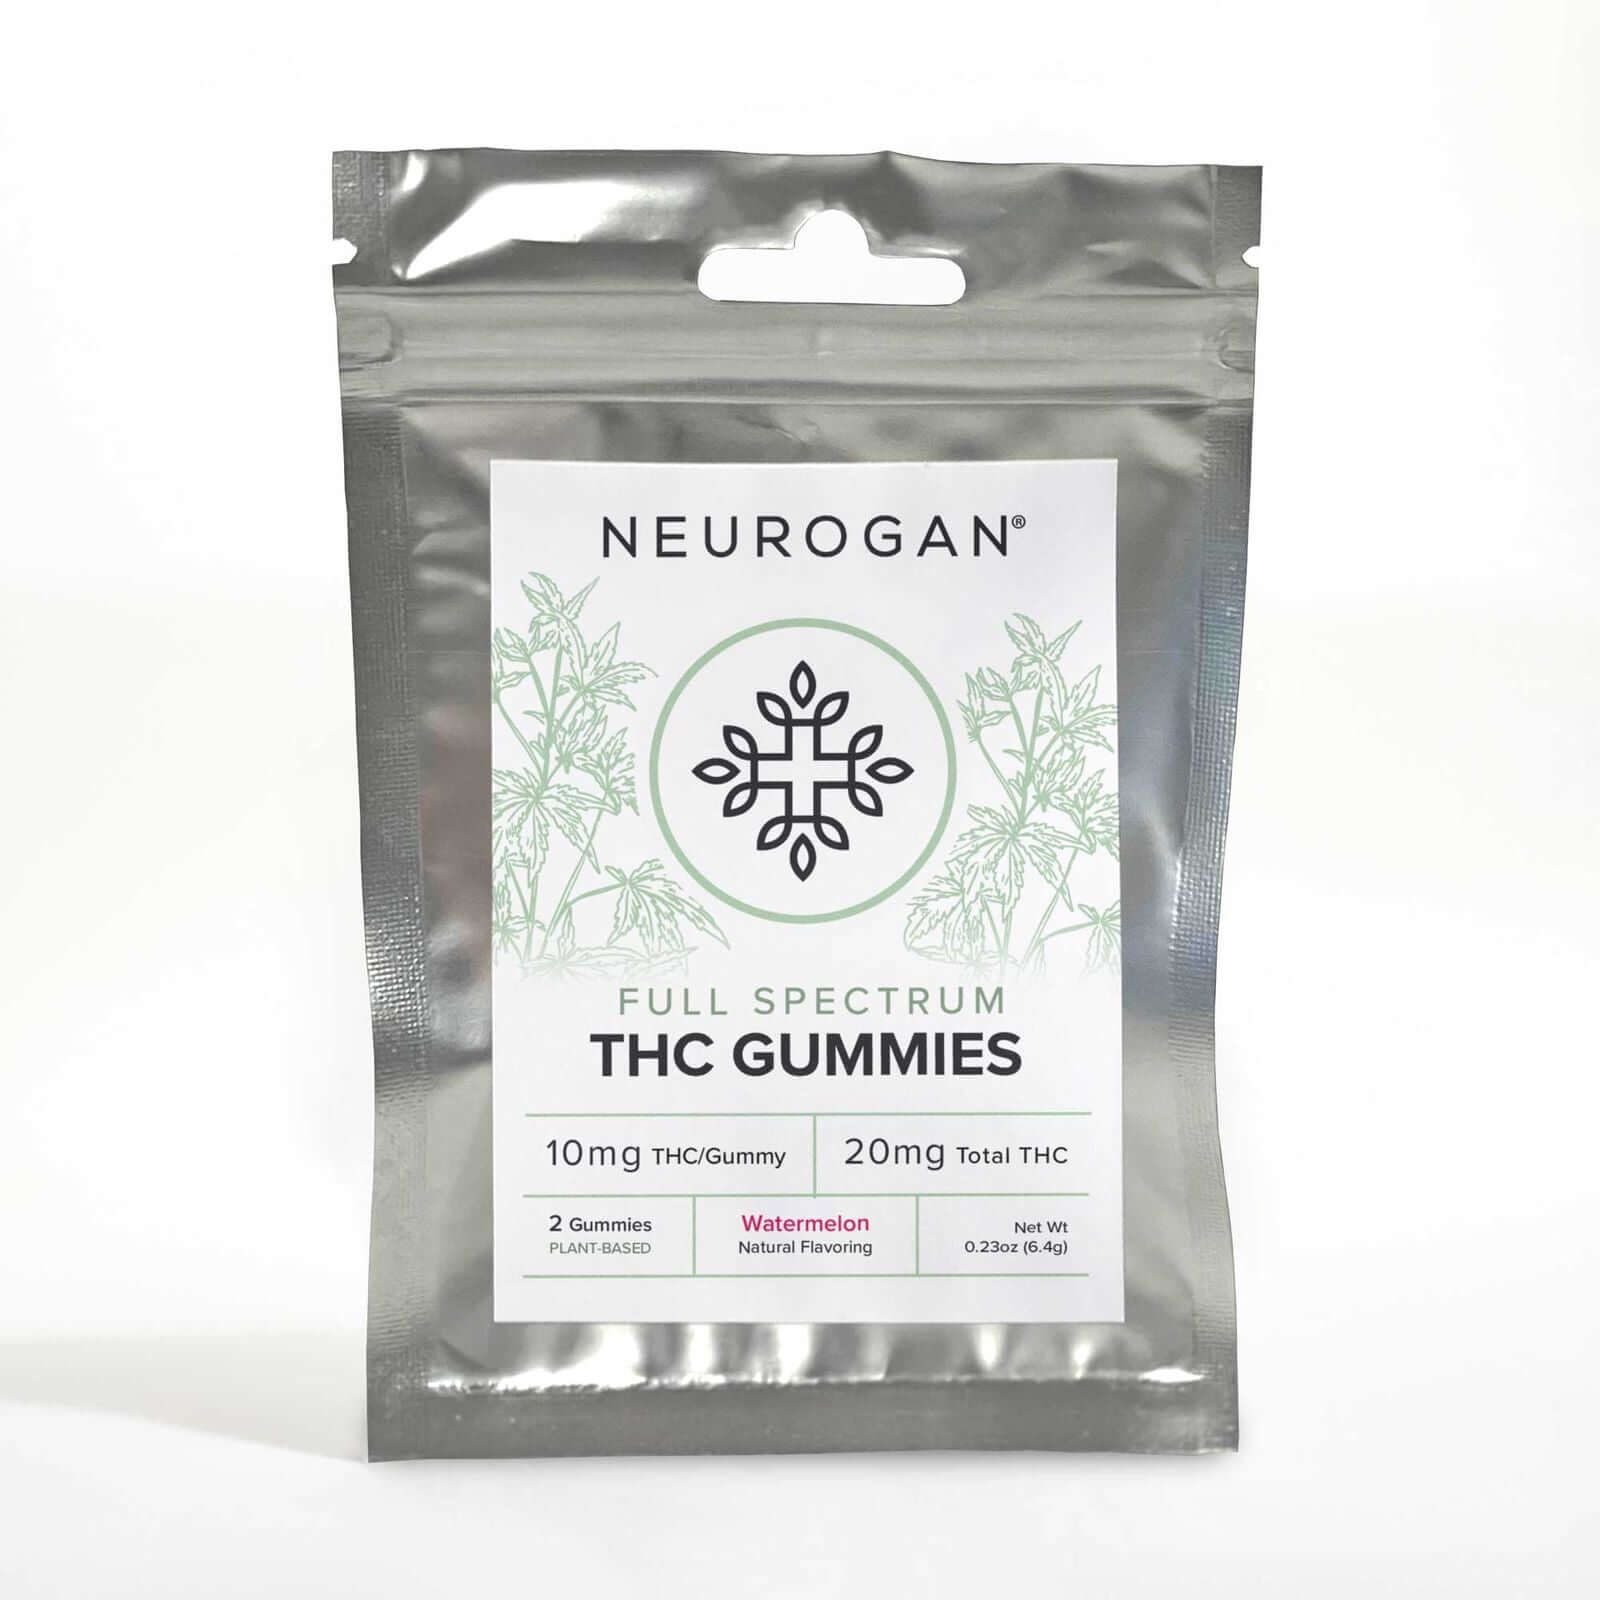 Pack of free THC Gummies, 10mg THC per gummy, two pieces, watermelon flavored.